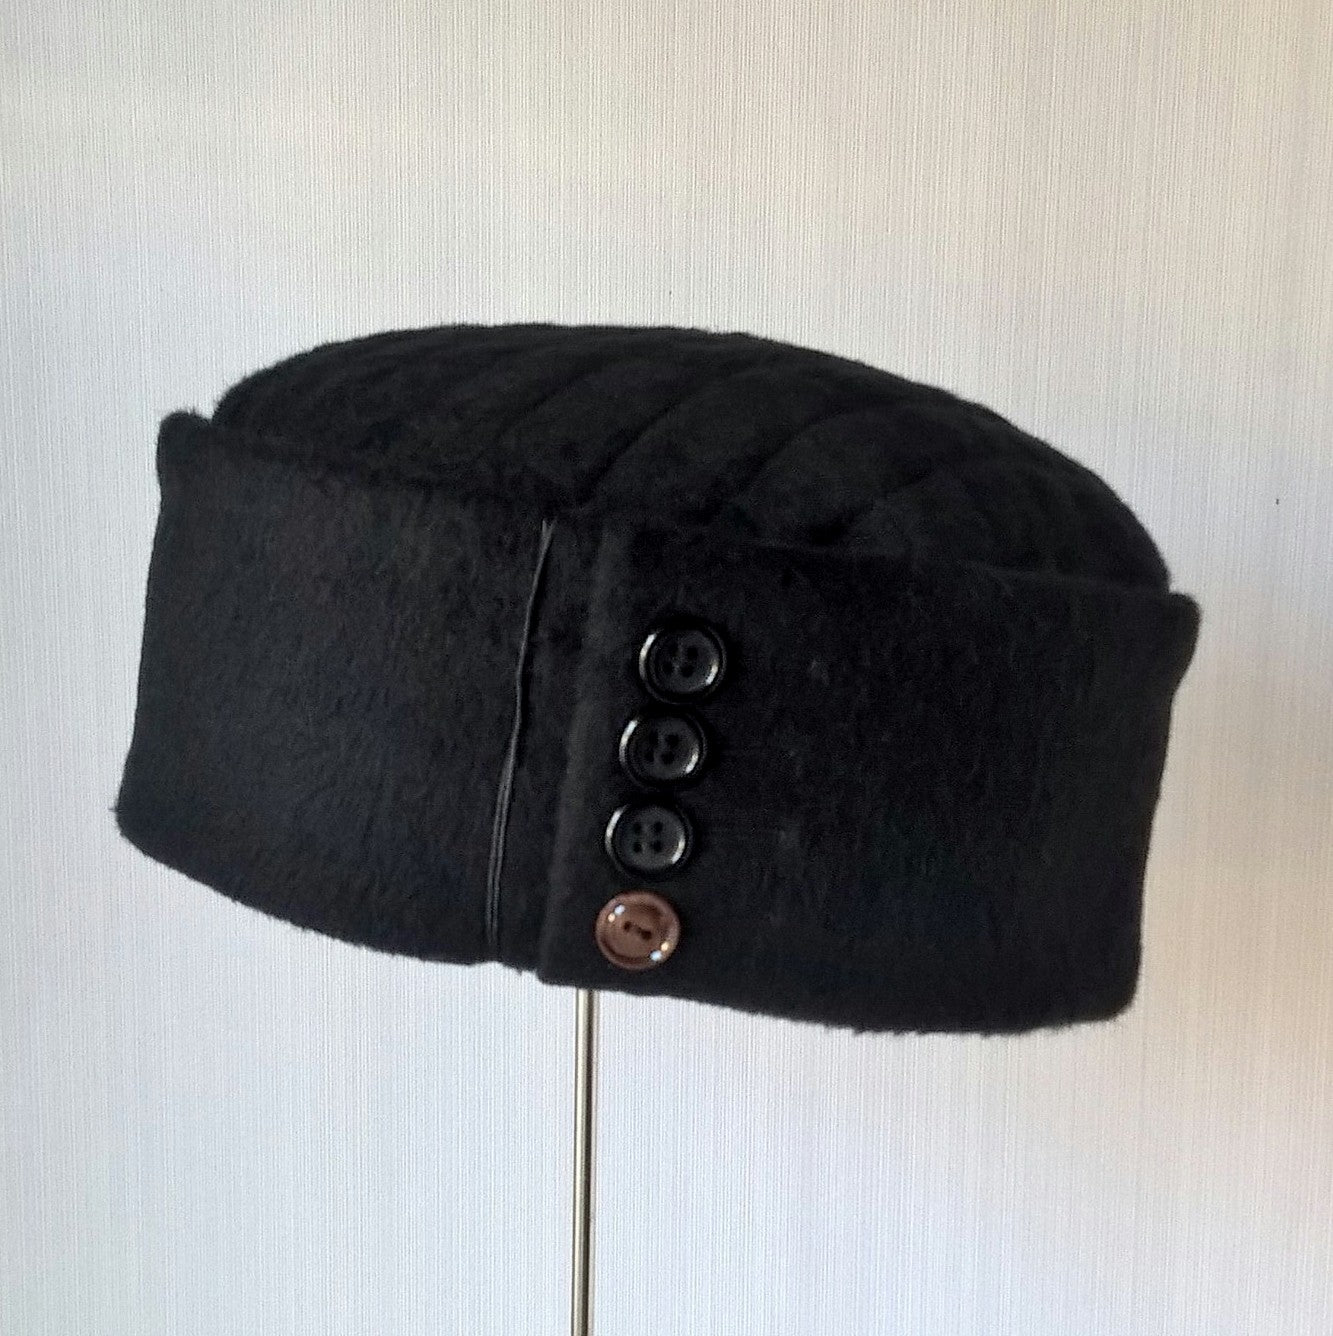 Black cashmere brimless hat handmade from up-cycled coat